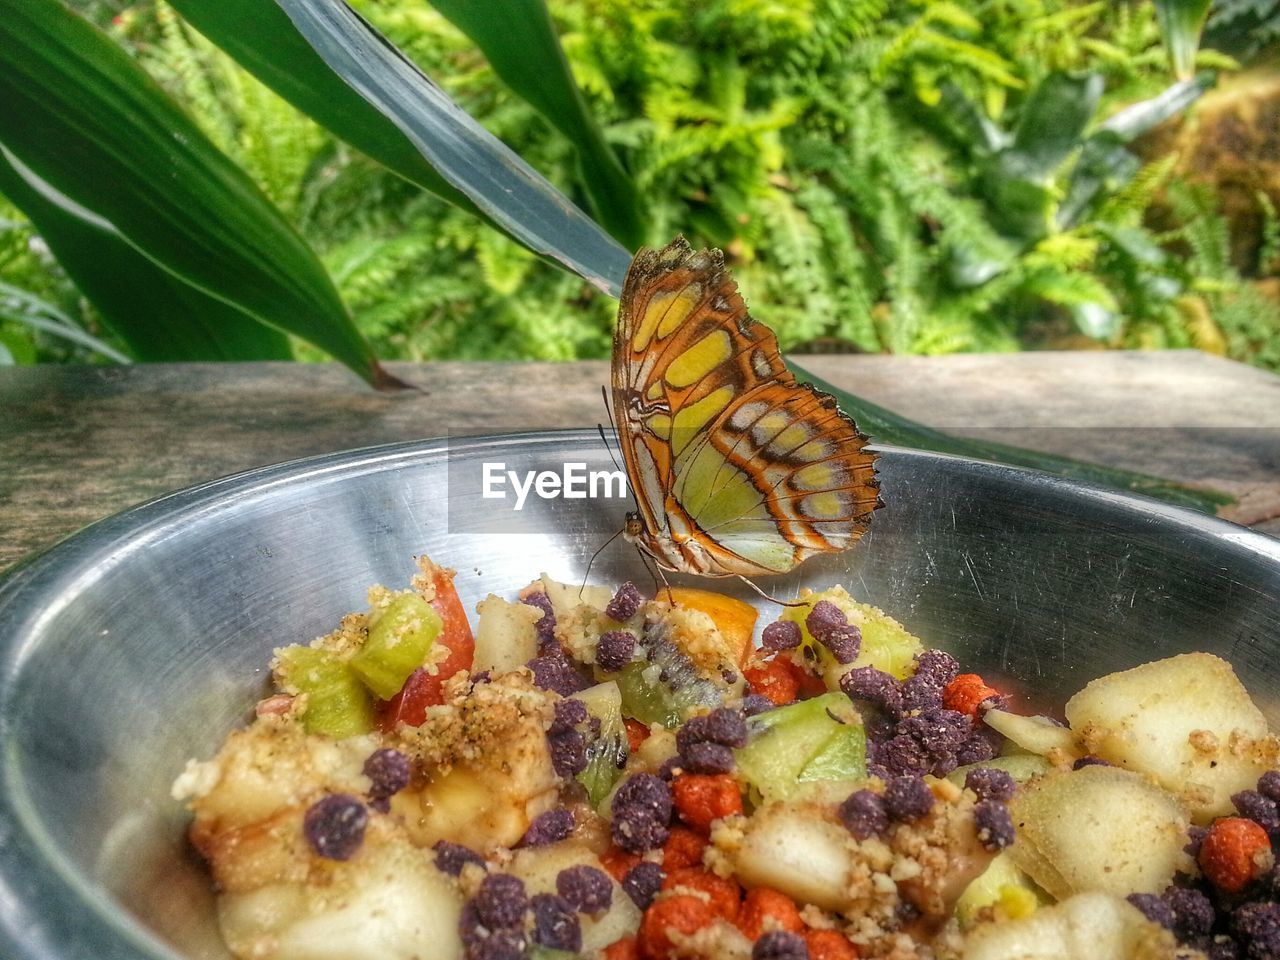 Butterfly on food